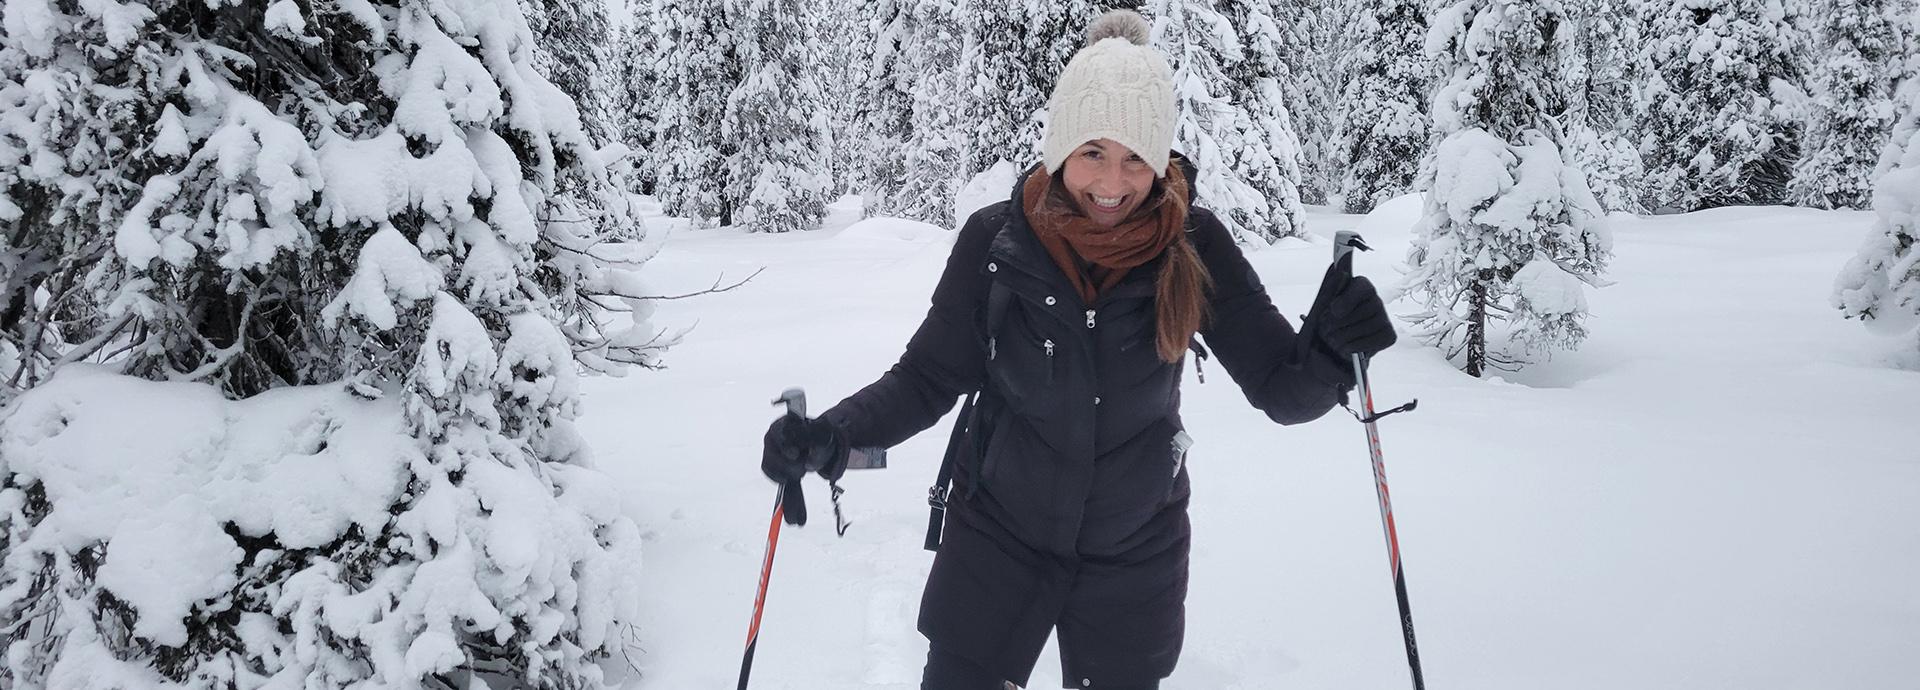 Kathryn Picardo snow-shoeing in a snowy forest